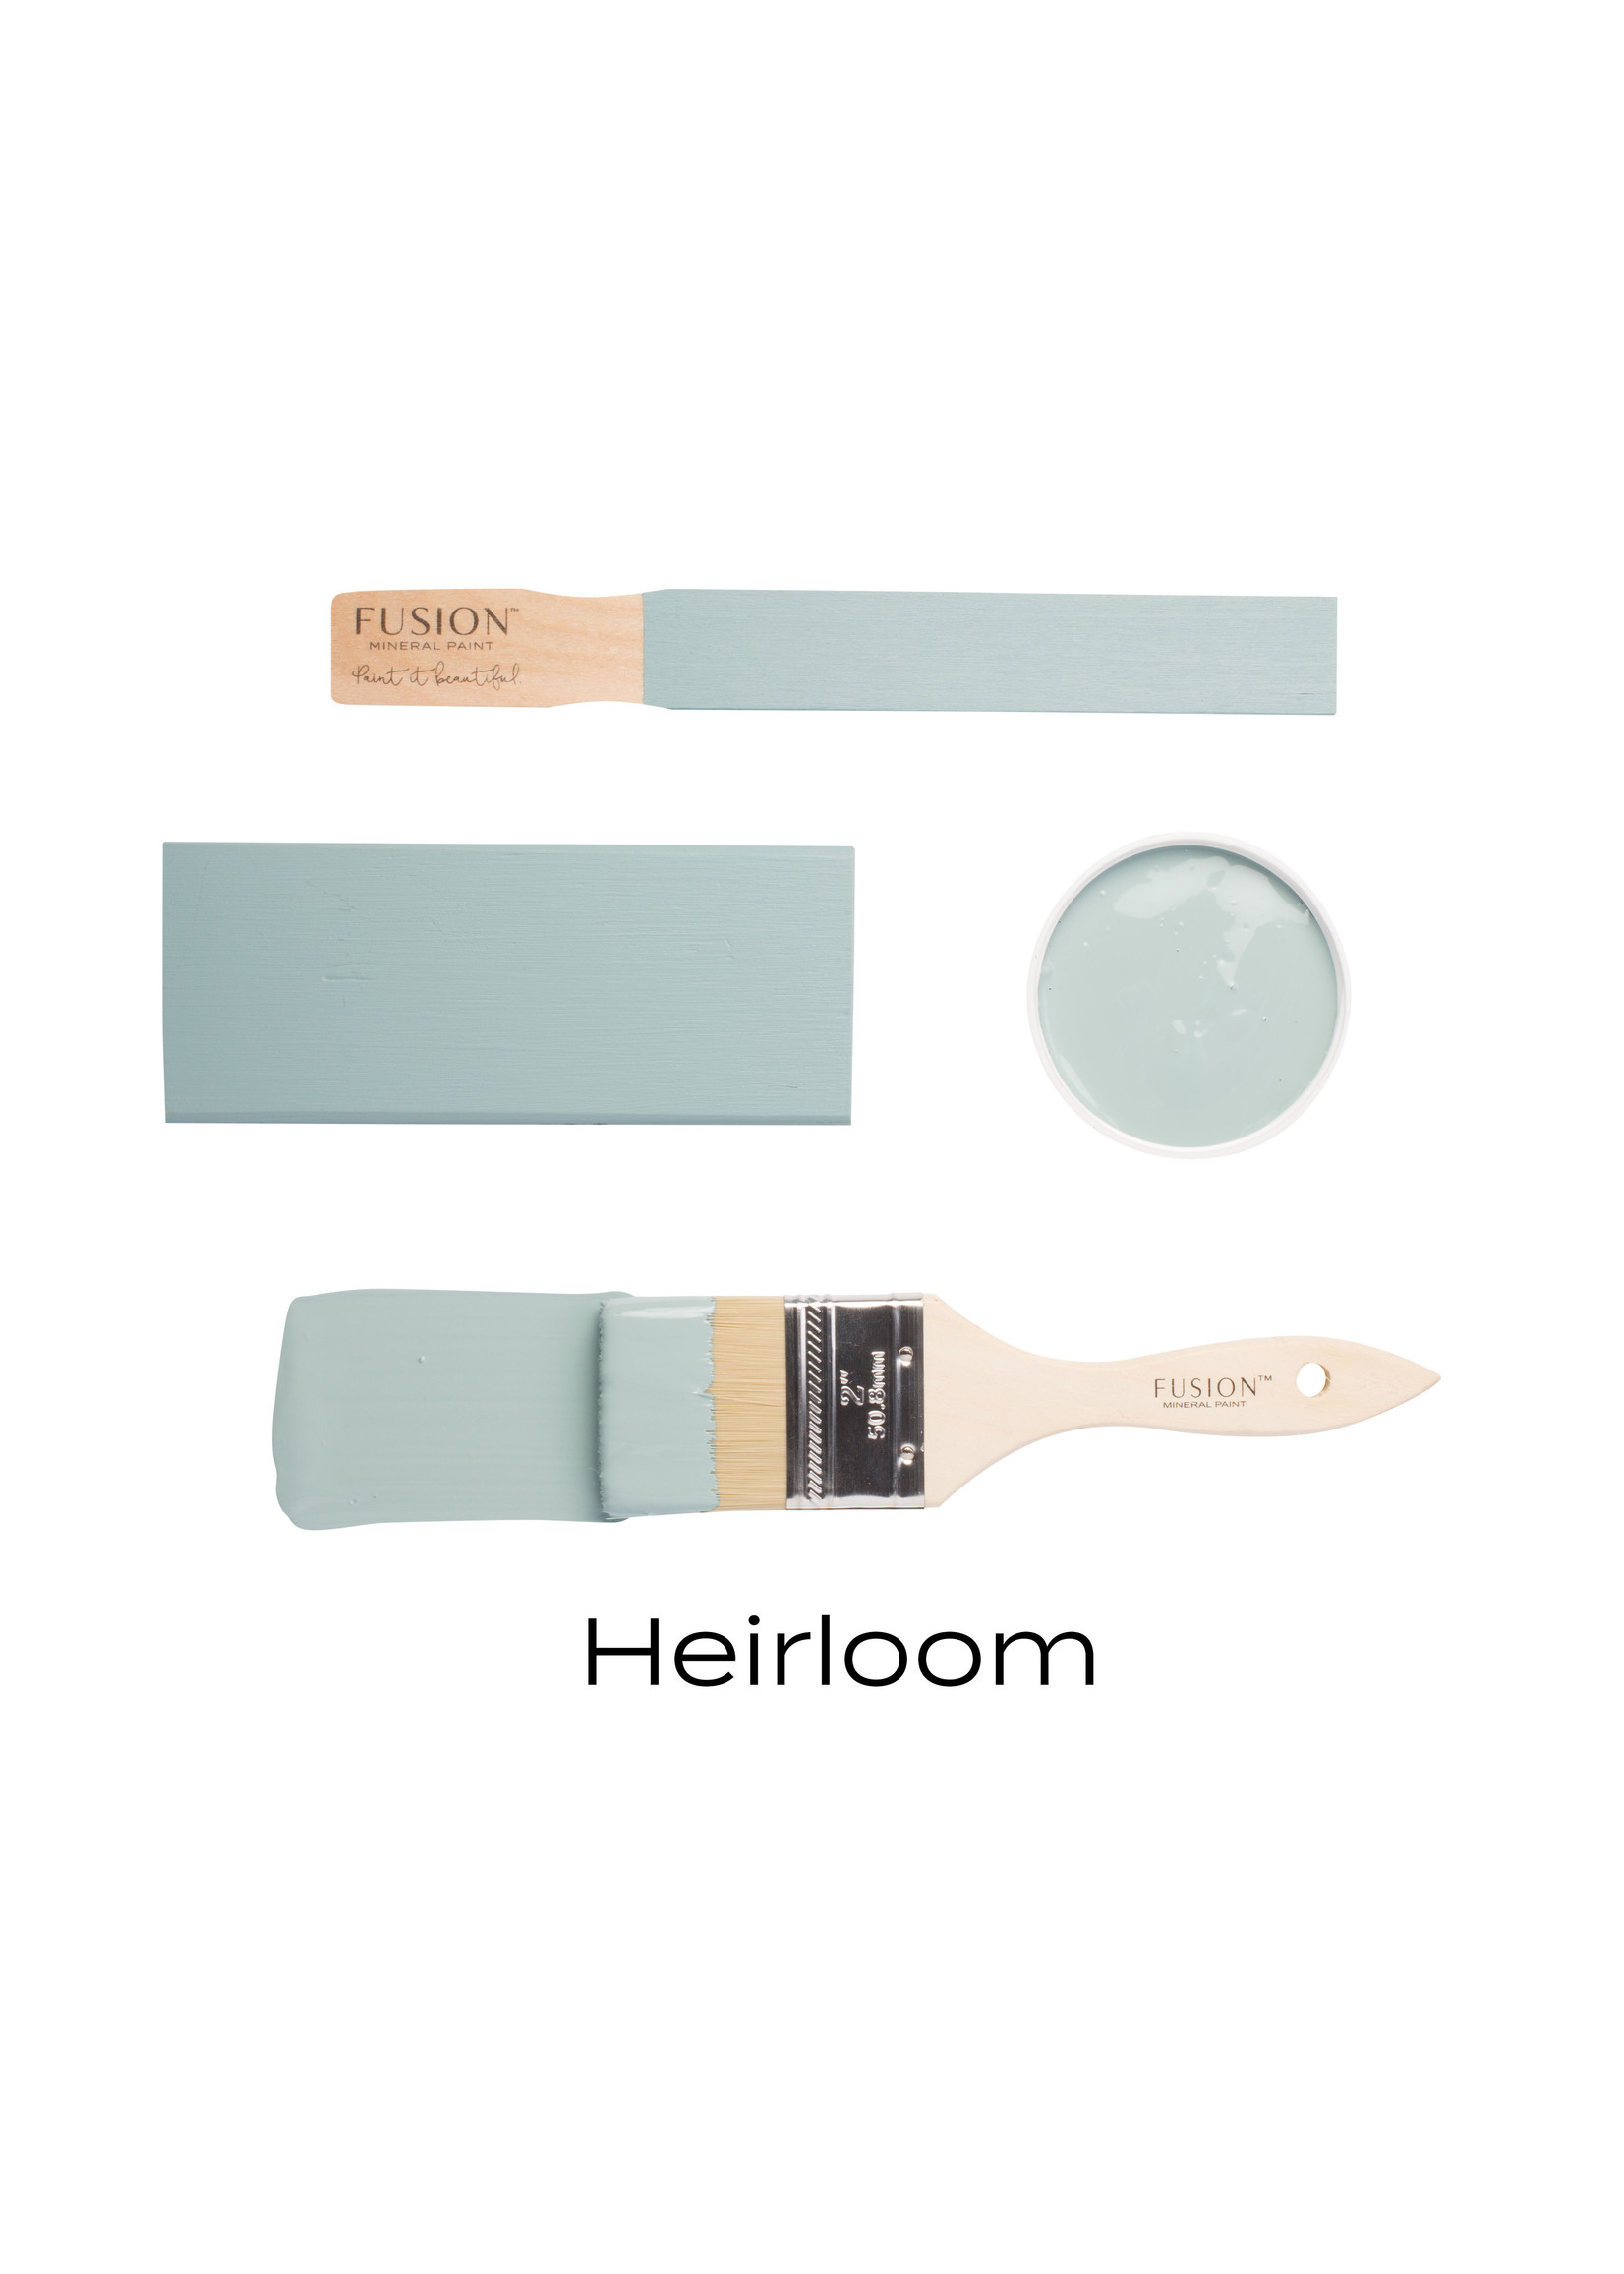 Fusion Mineral Paint™ - Heirloom